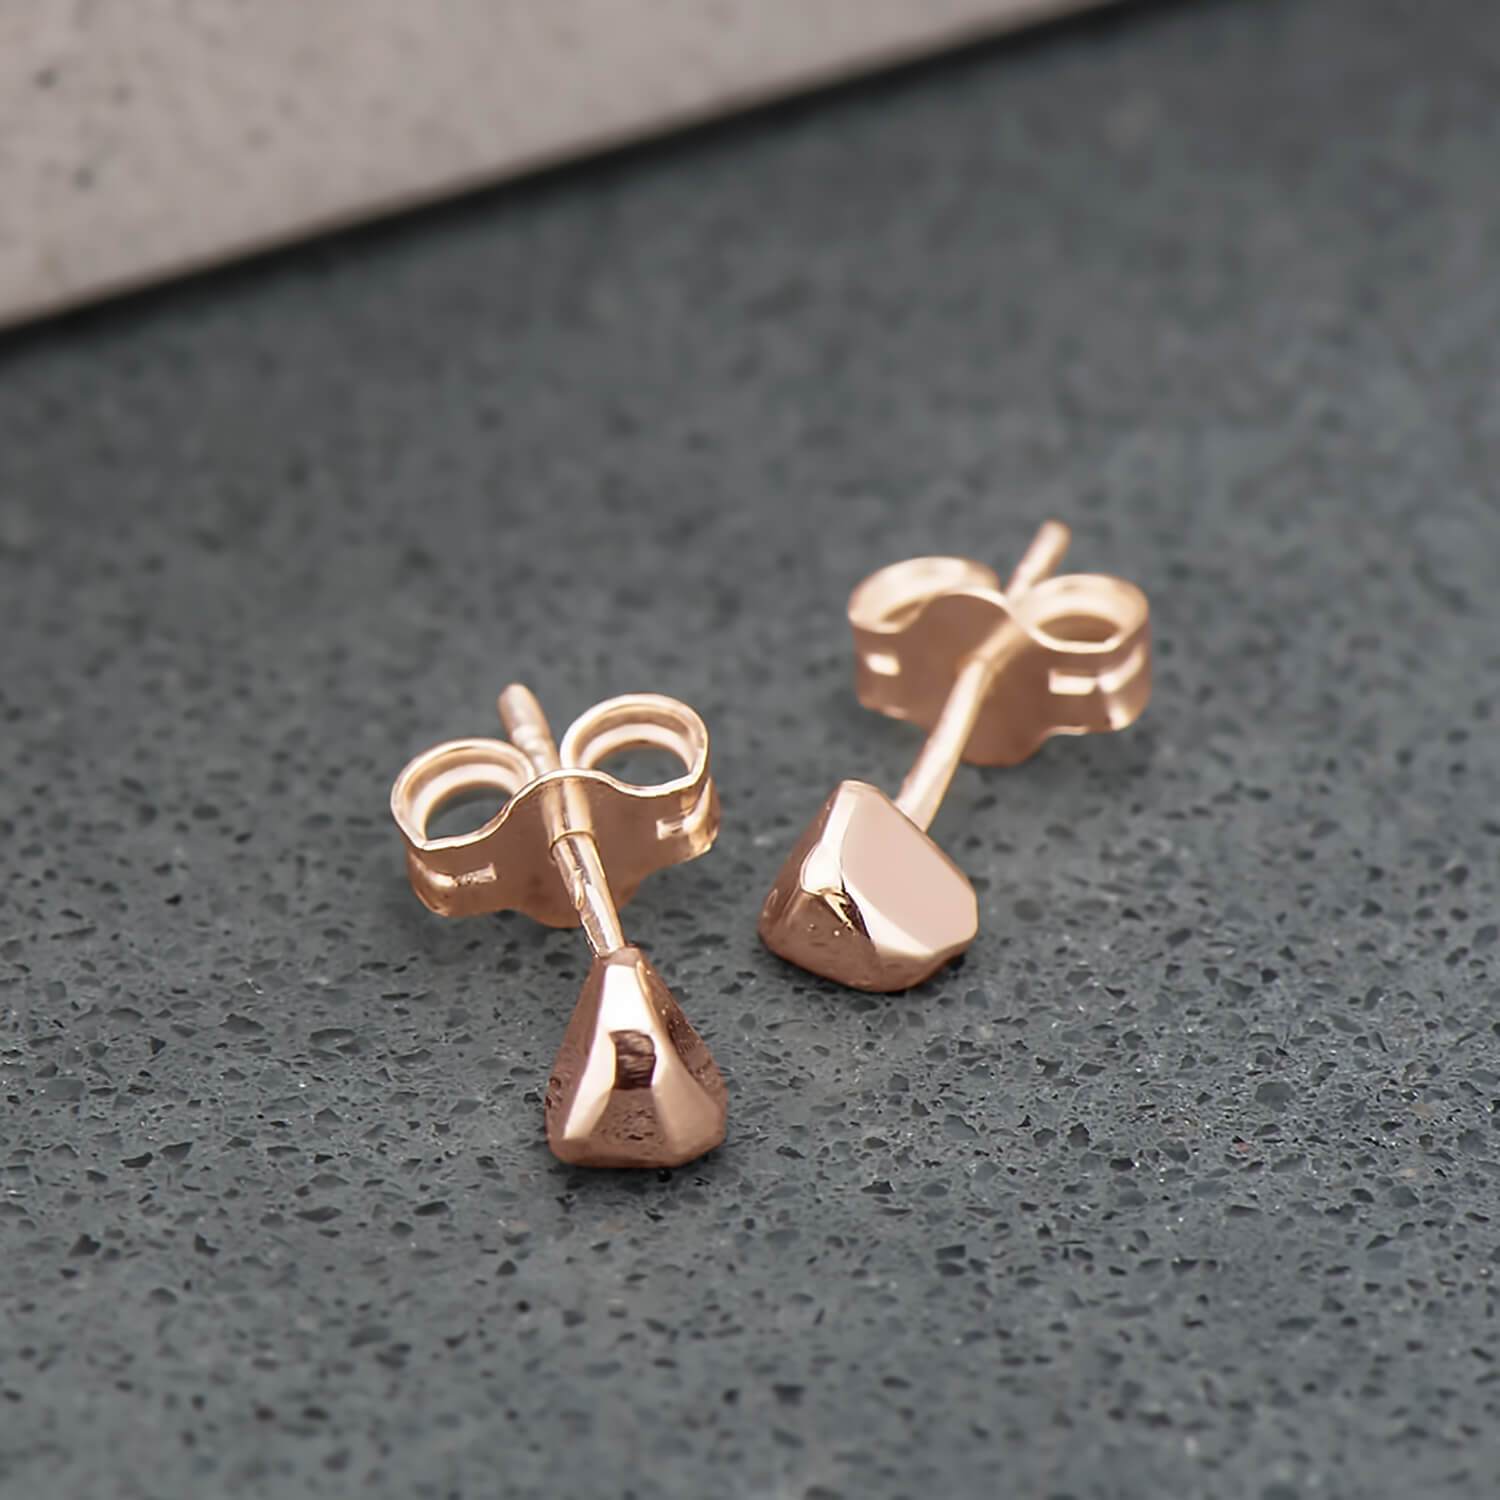 Recycled 10 karat rose gold studs, shaped like triangles and highly polished.